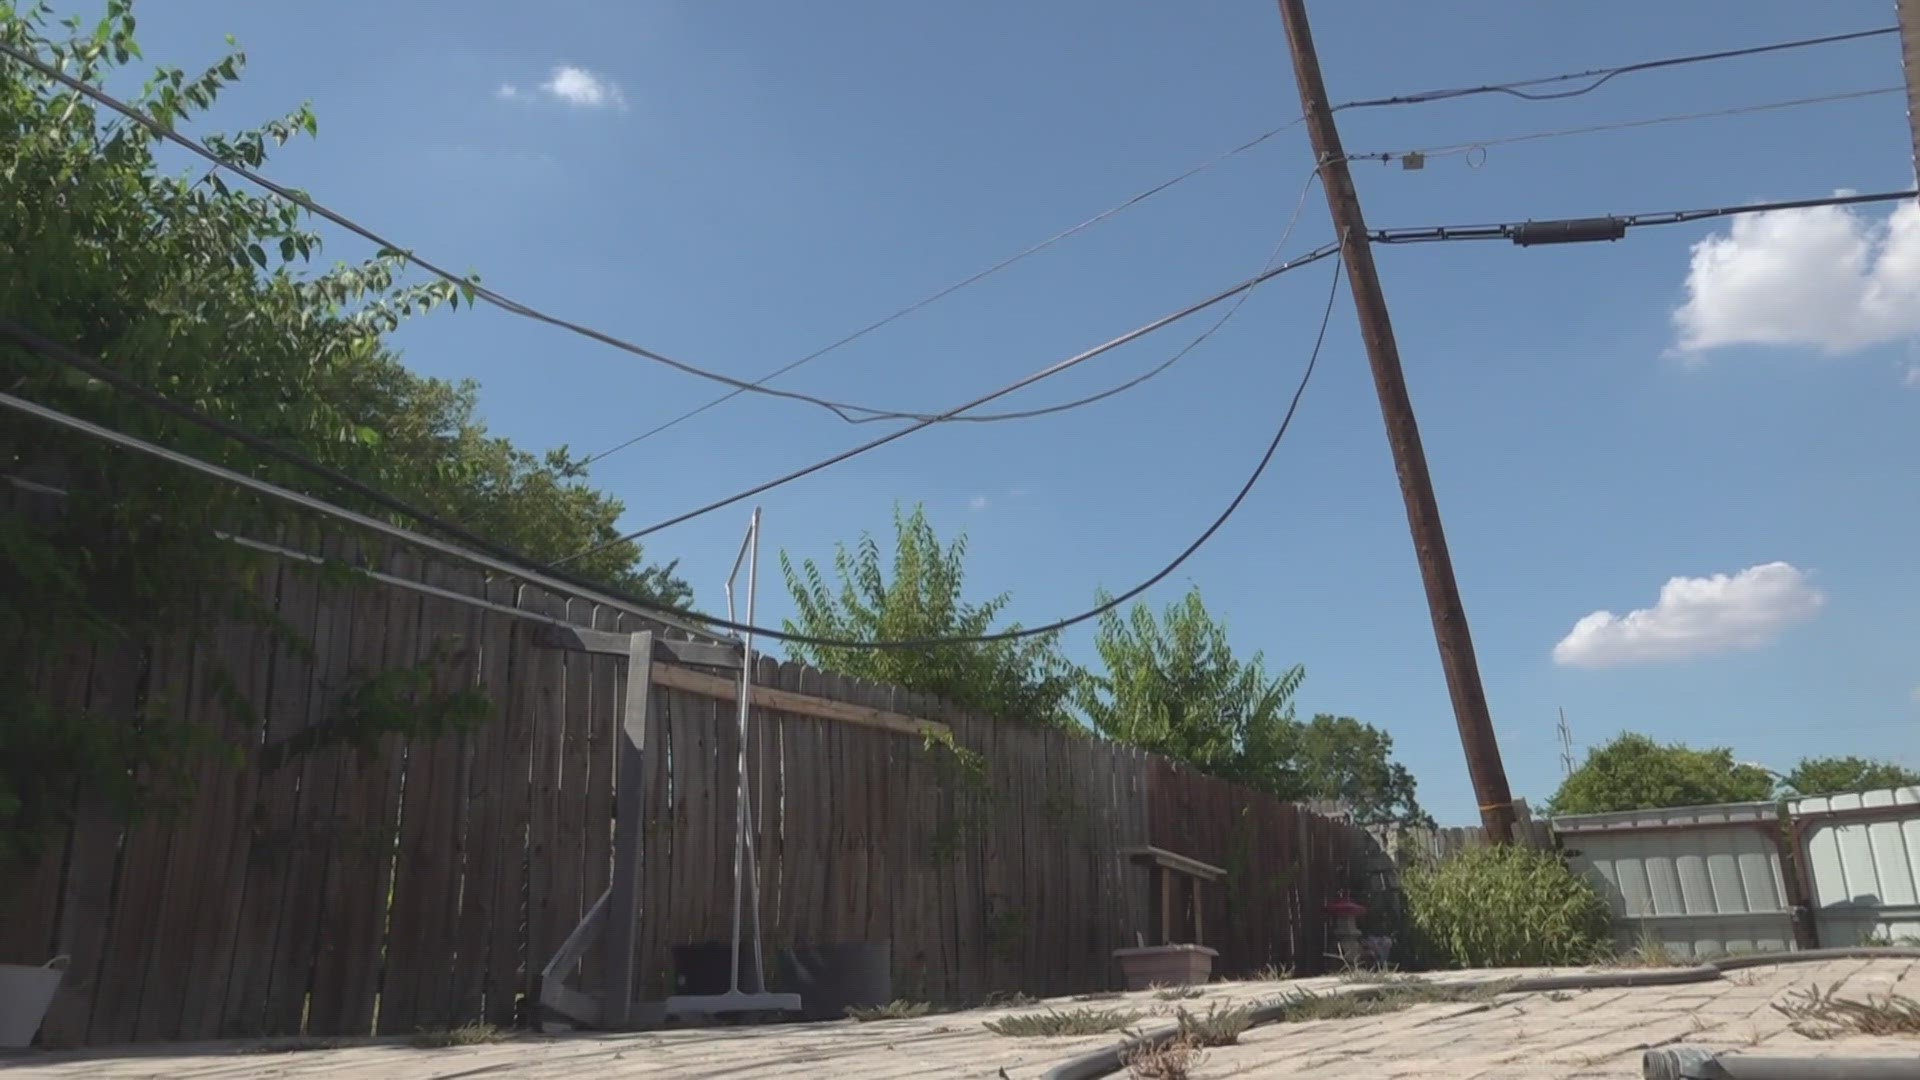 A family in Temple says an AT&T utility pole is leaning dangerously into their backyard. After four years, it's only gotten worse.